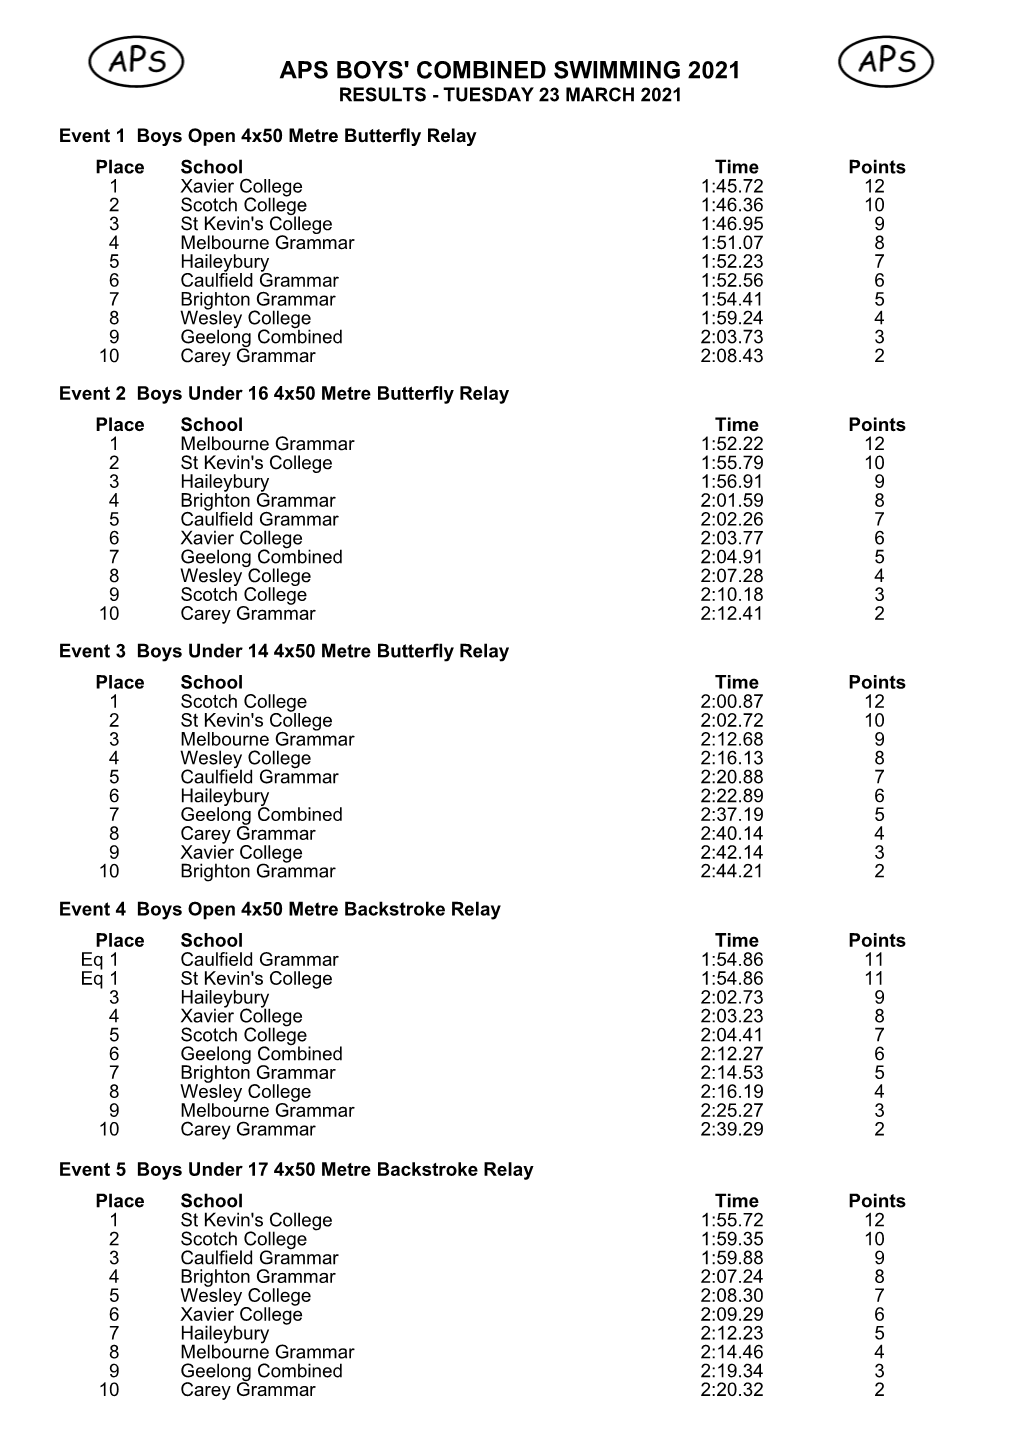 Aps Boys' Combined Swimming 2021 Results - Tuesday 23 March 2021